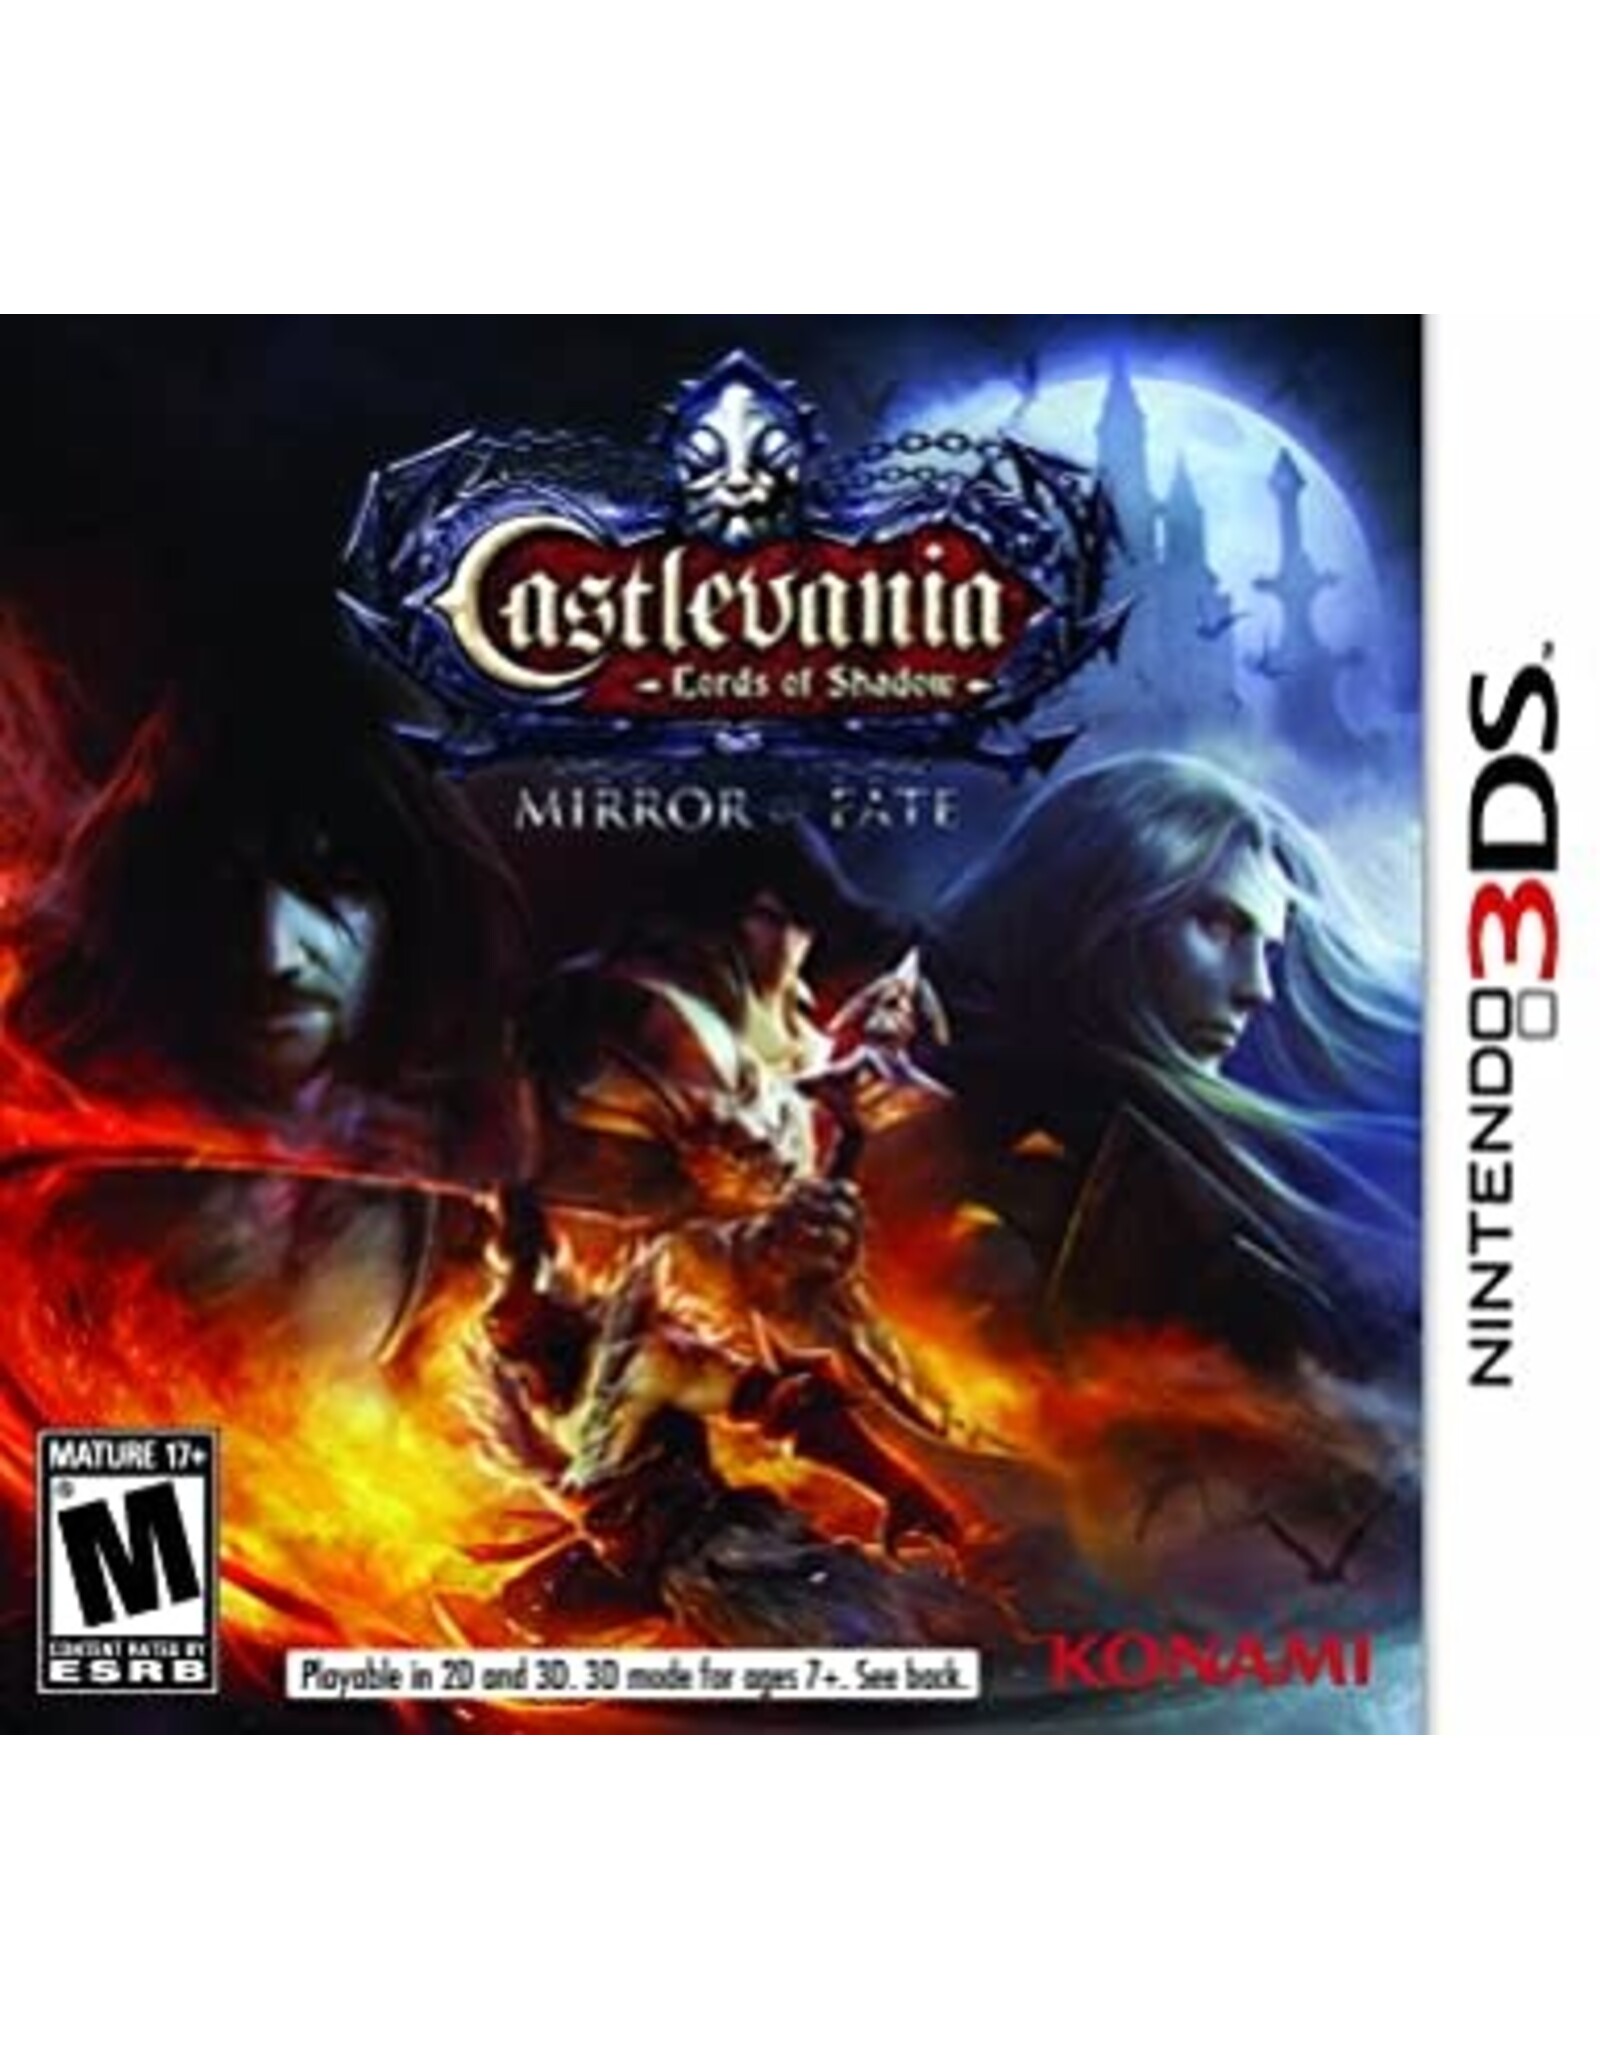 Nintendo 3DS Castlevania: Mirror Of Fate (No Manual, Minor Damaged Insert and Cart Label)